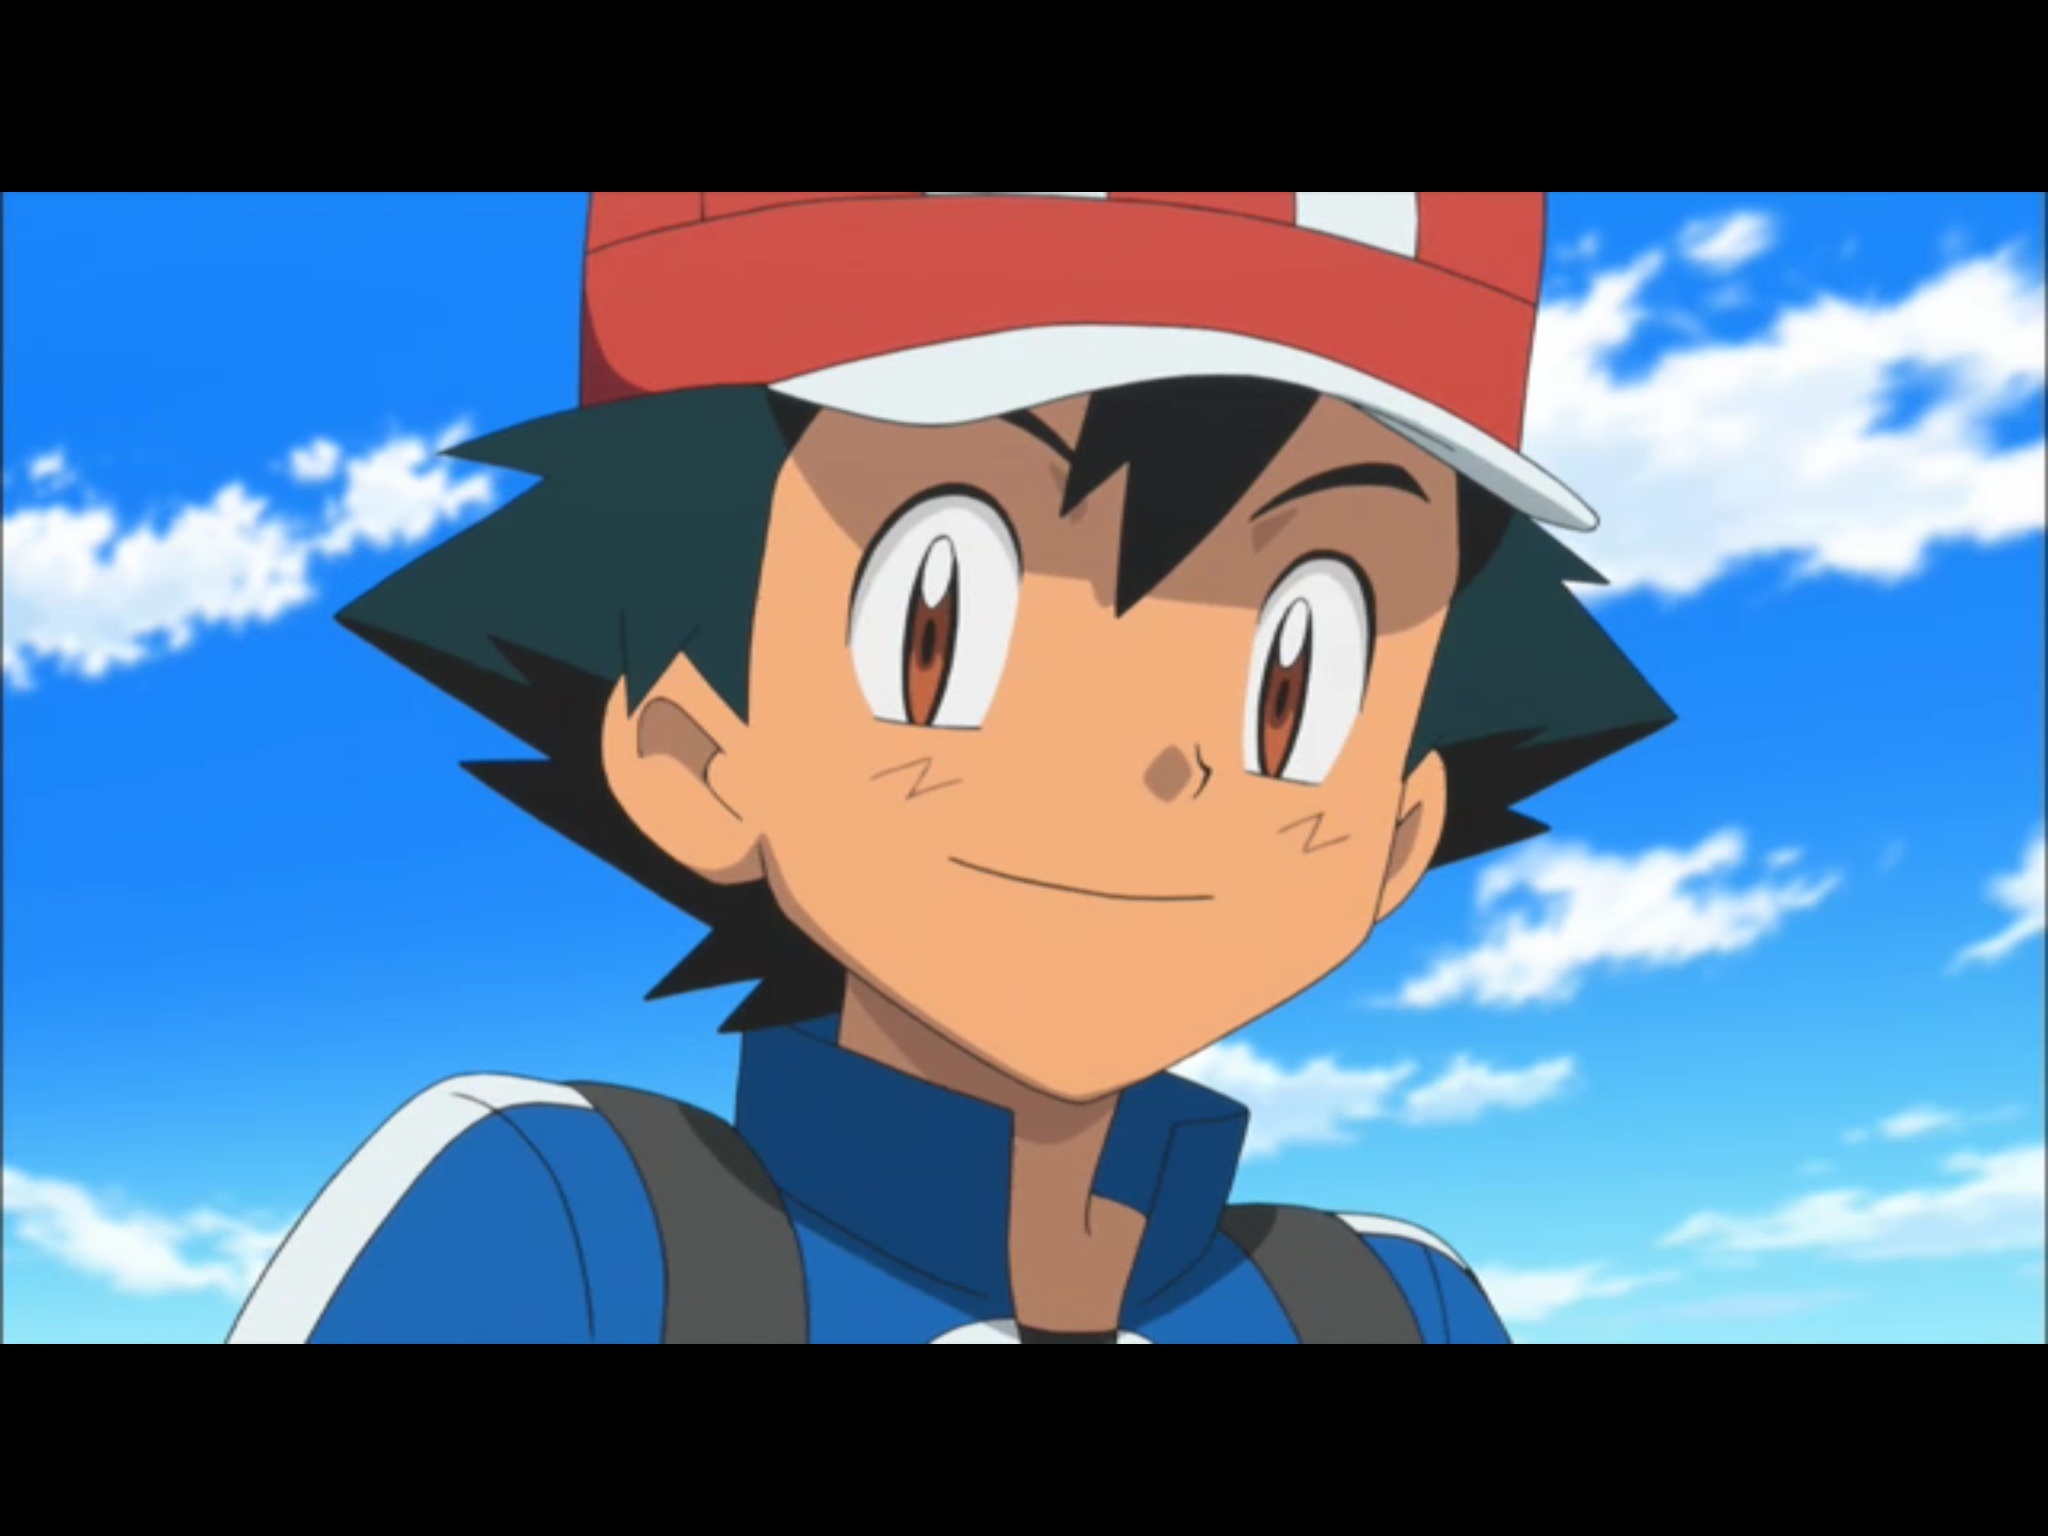 Ash finally goes to school in new anime! - Nerd Reactor